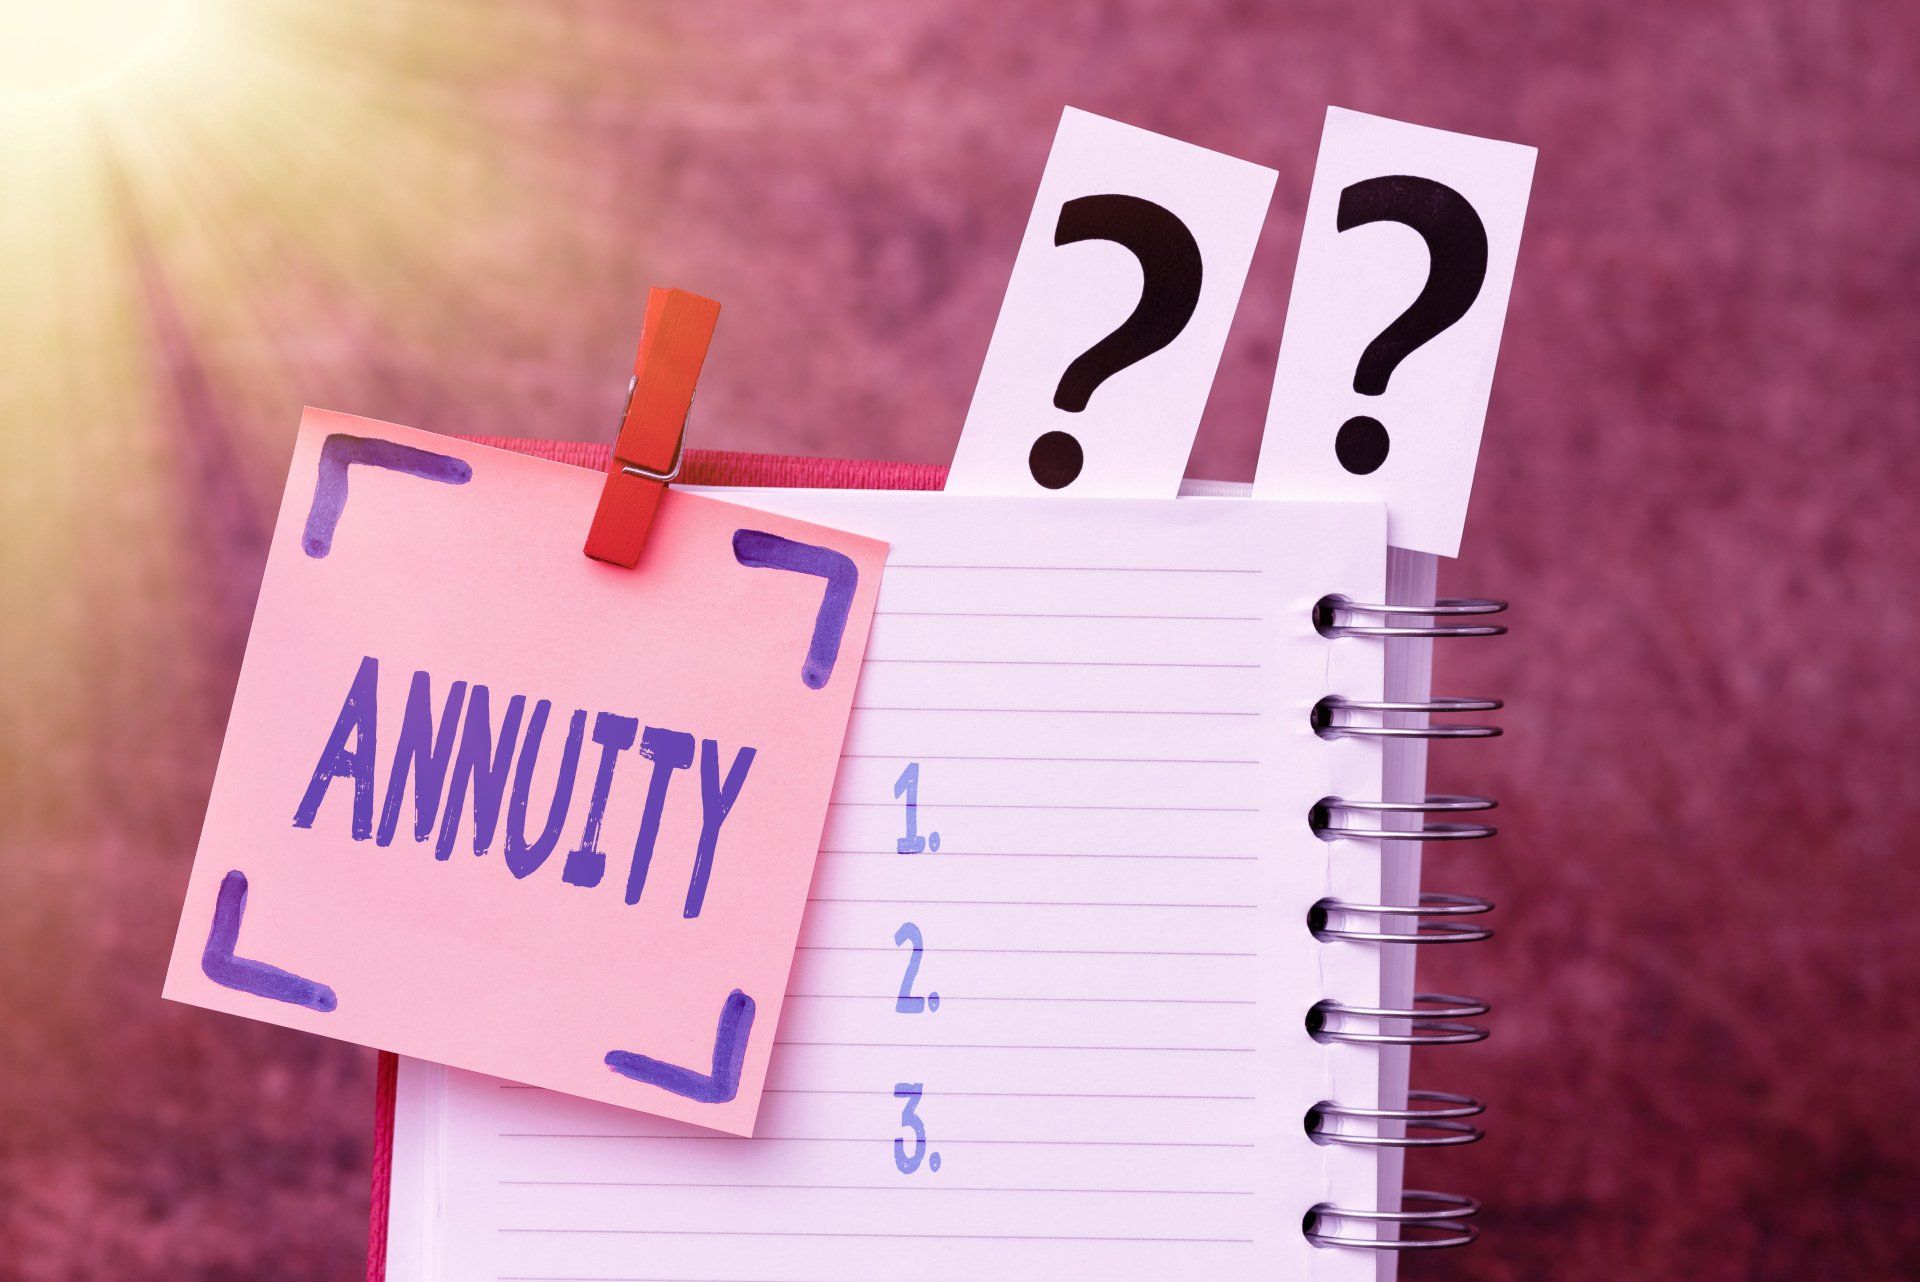 four types of annuities